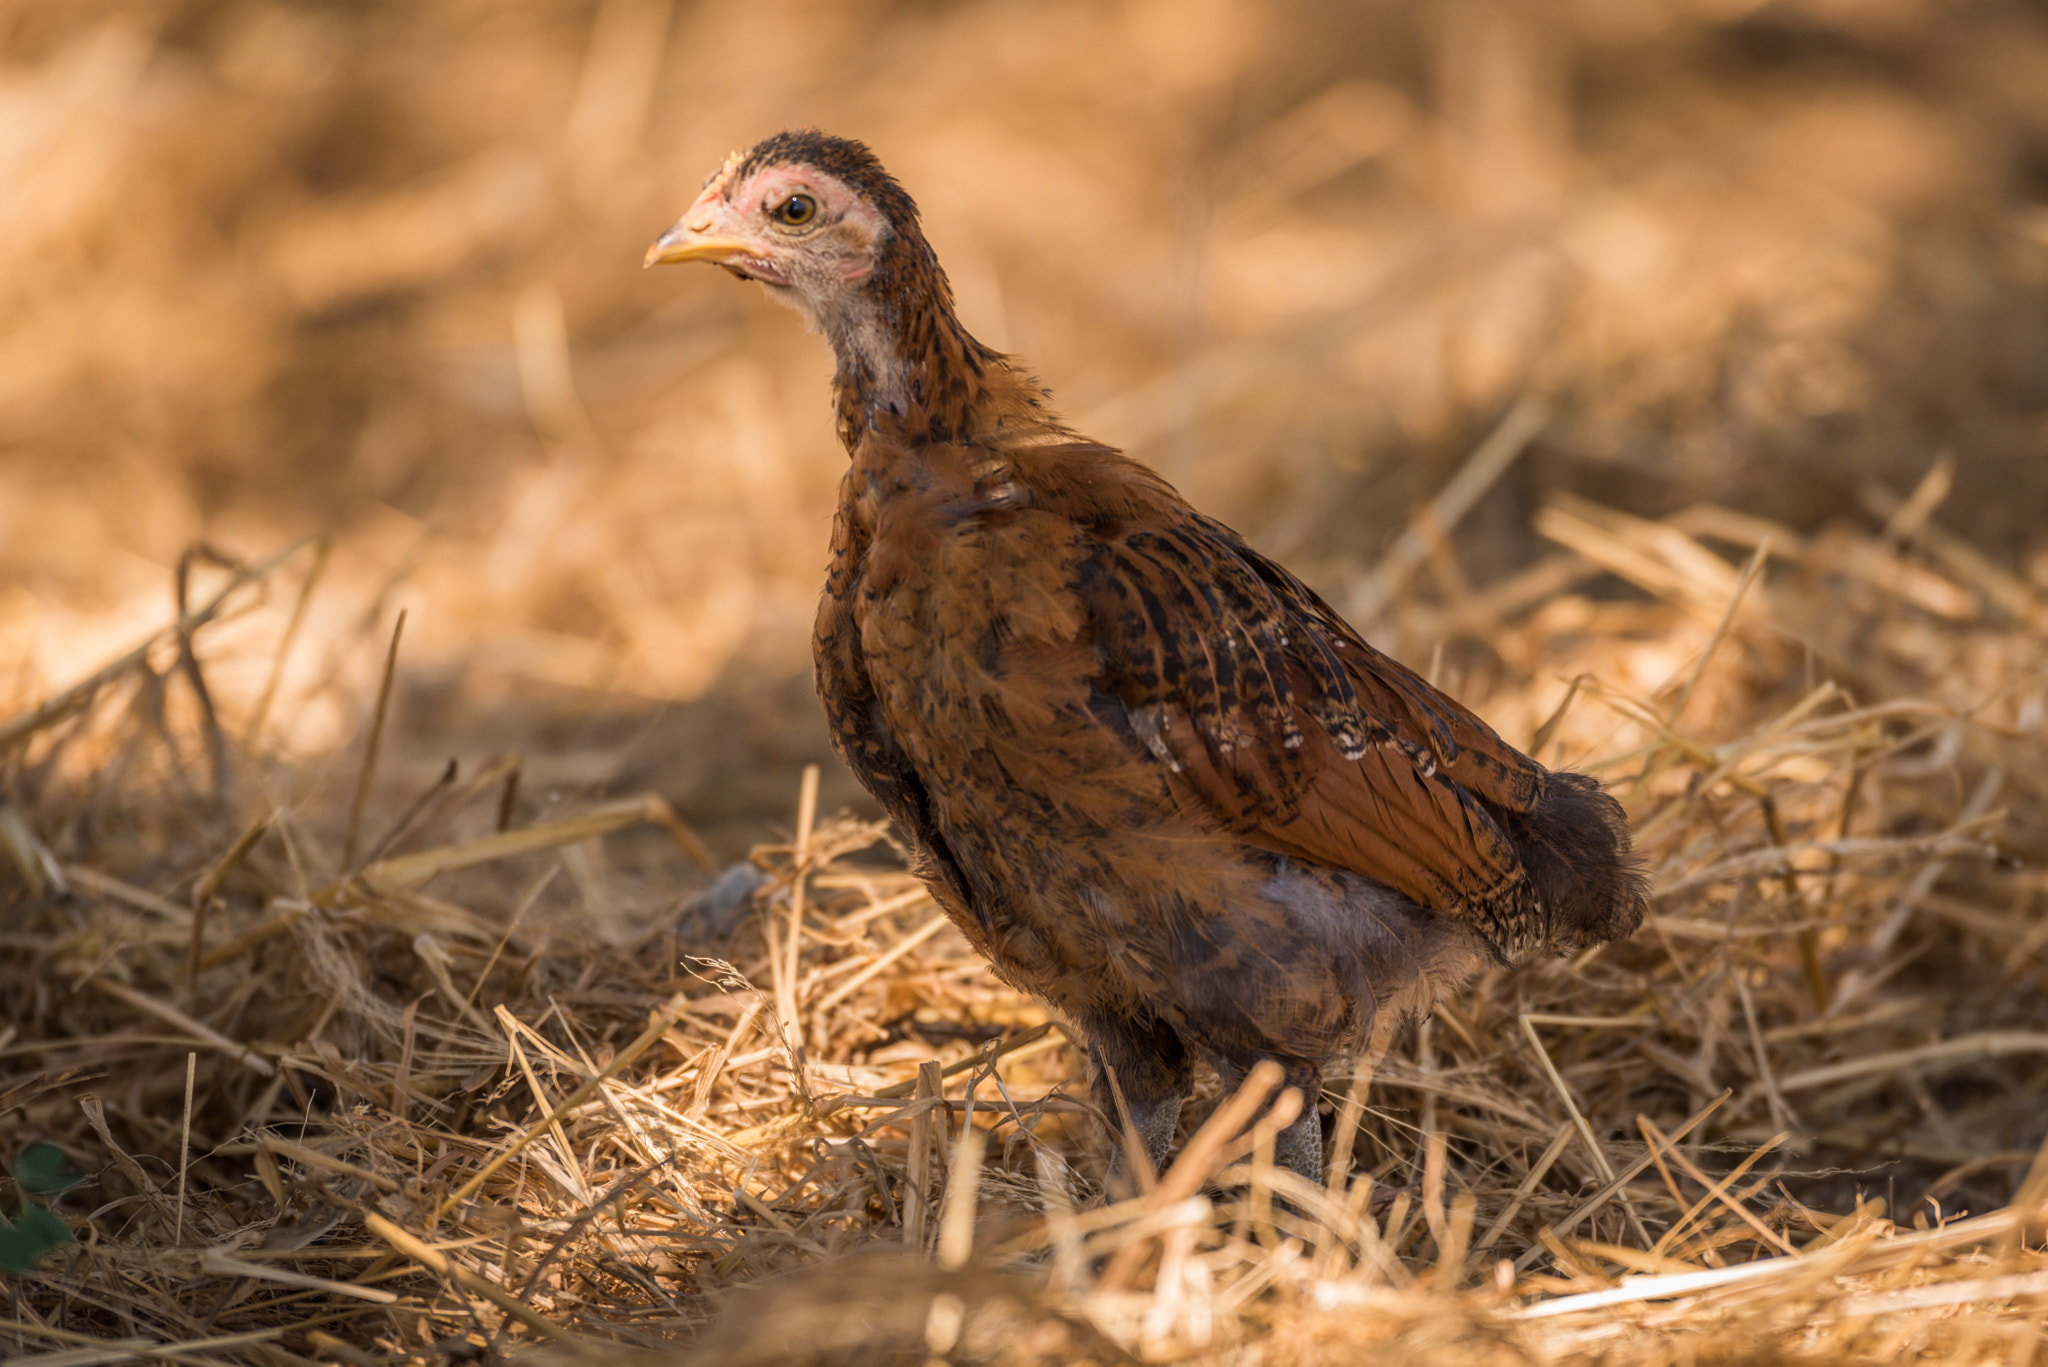 Nikon D810 sample photo. Chick in dry grass looking at camera photography